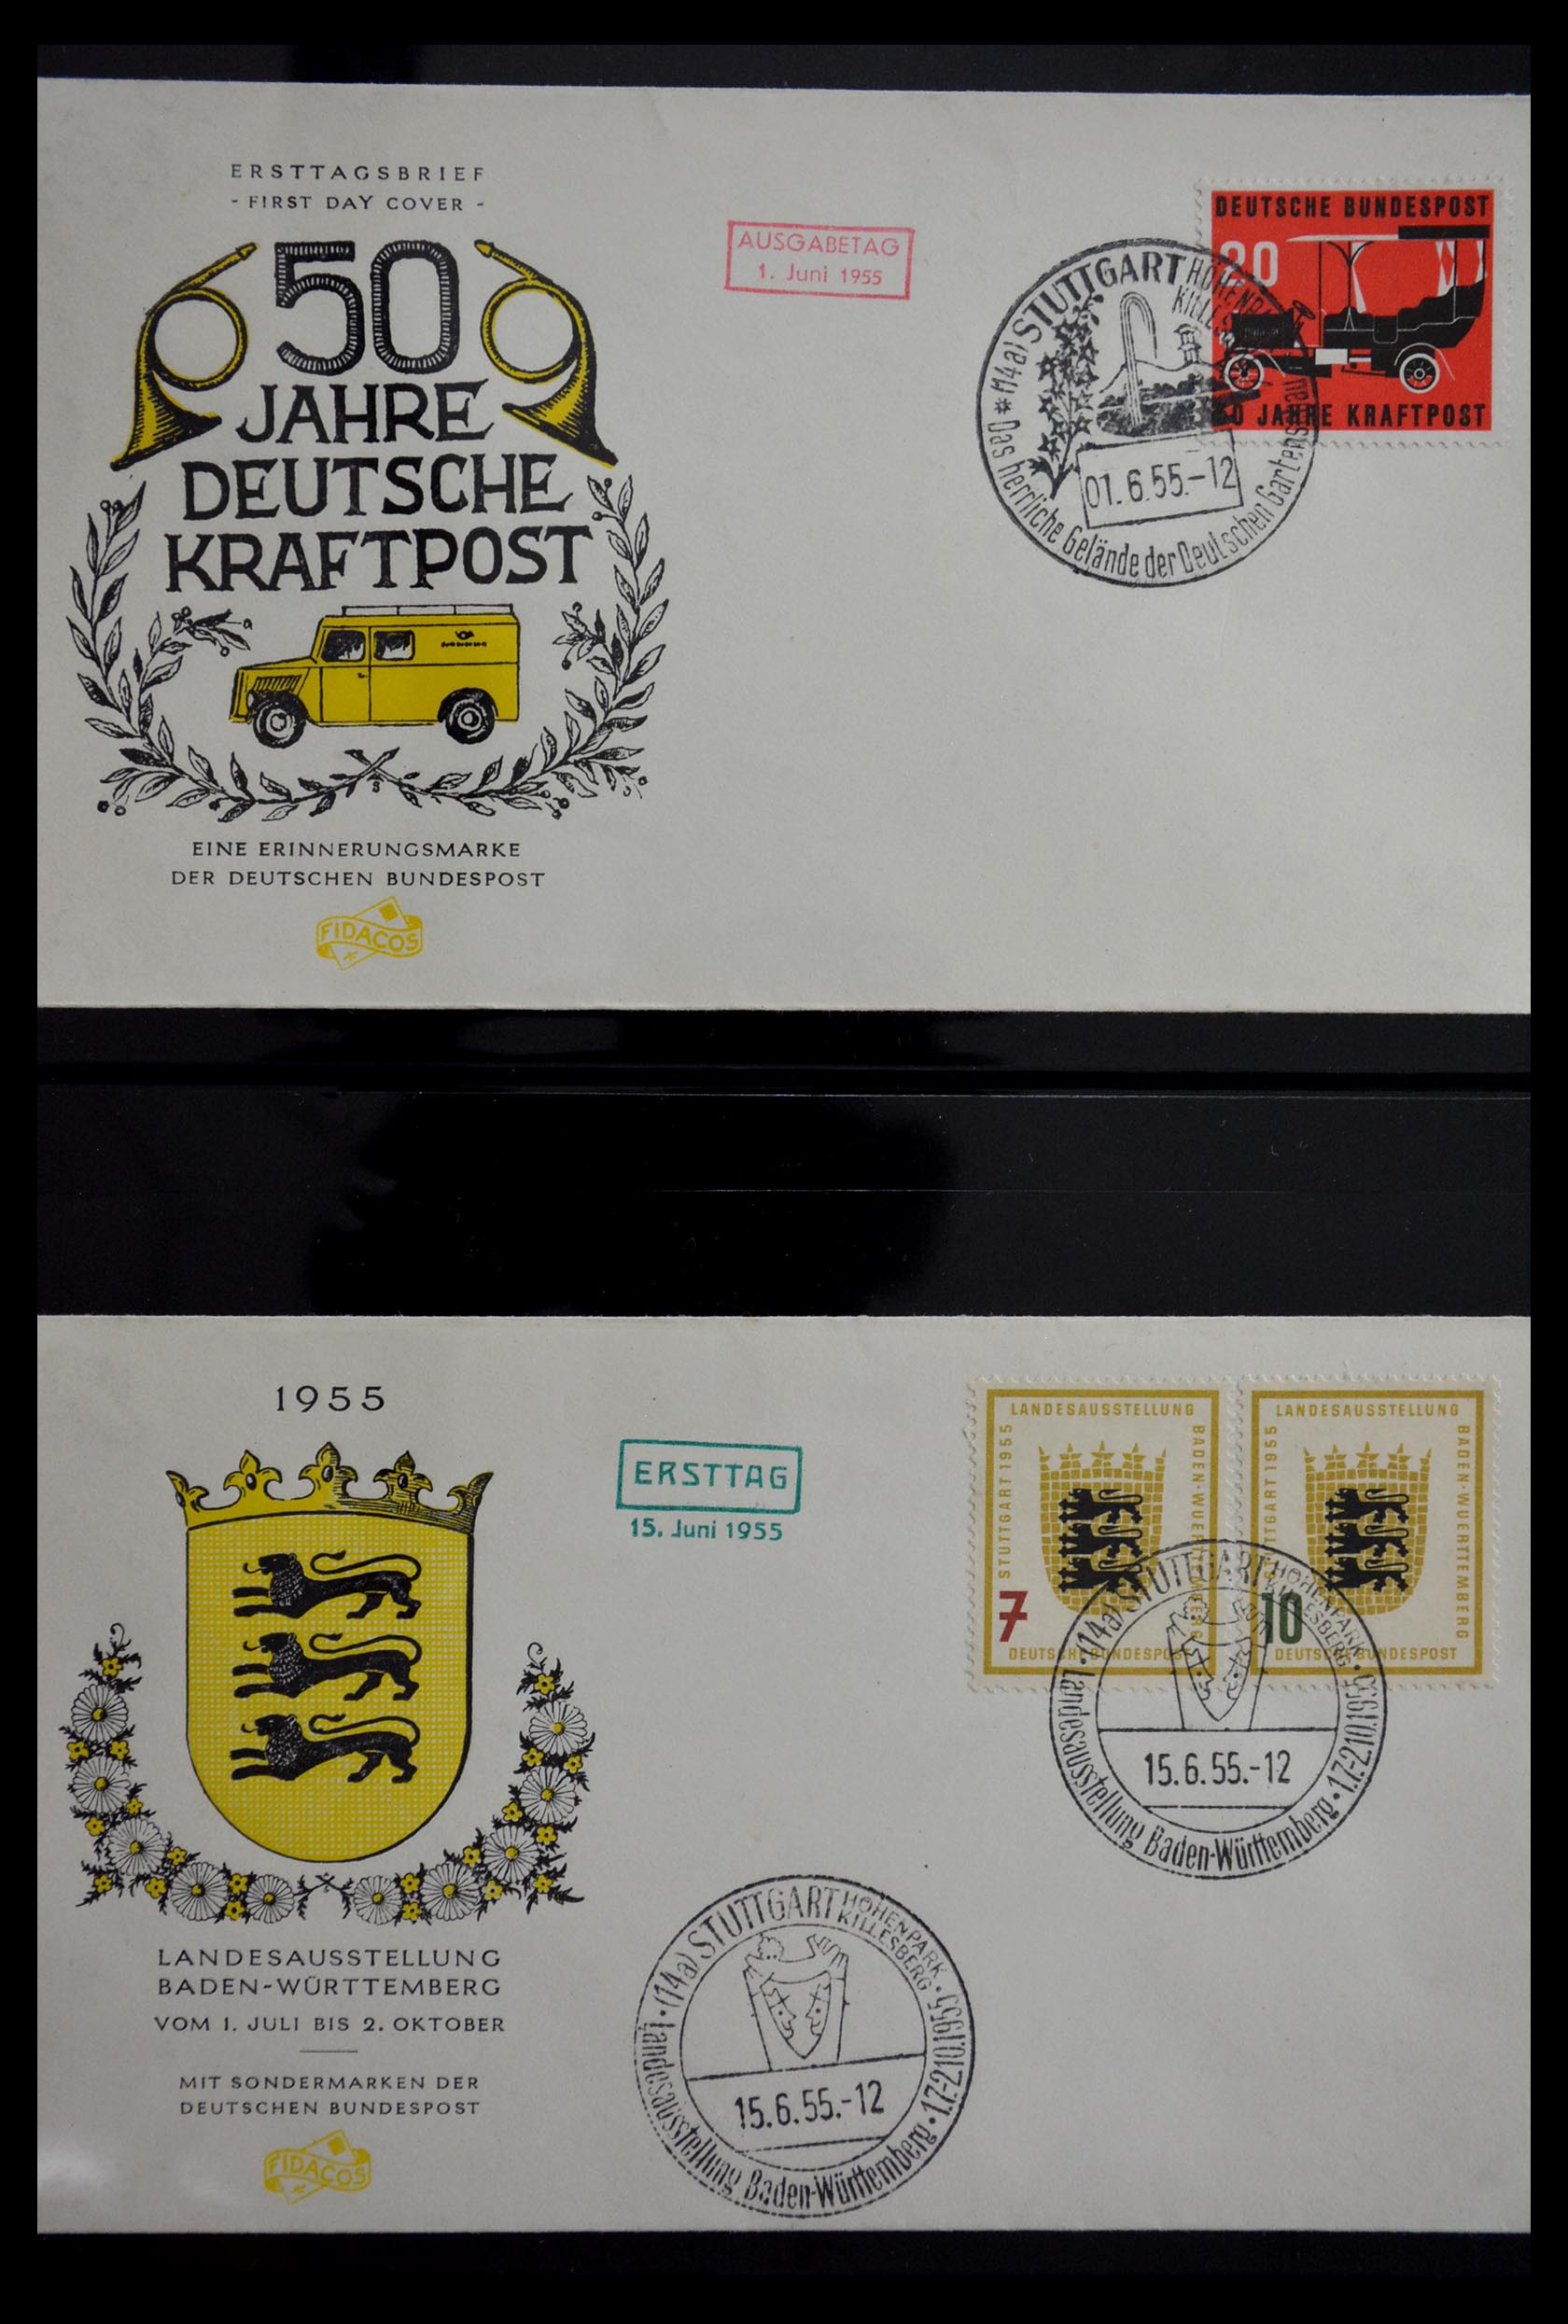 29382 011 - 29382 Germany covers and FDC's 1936-1965.